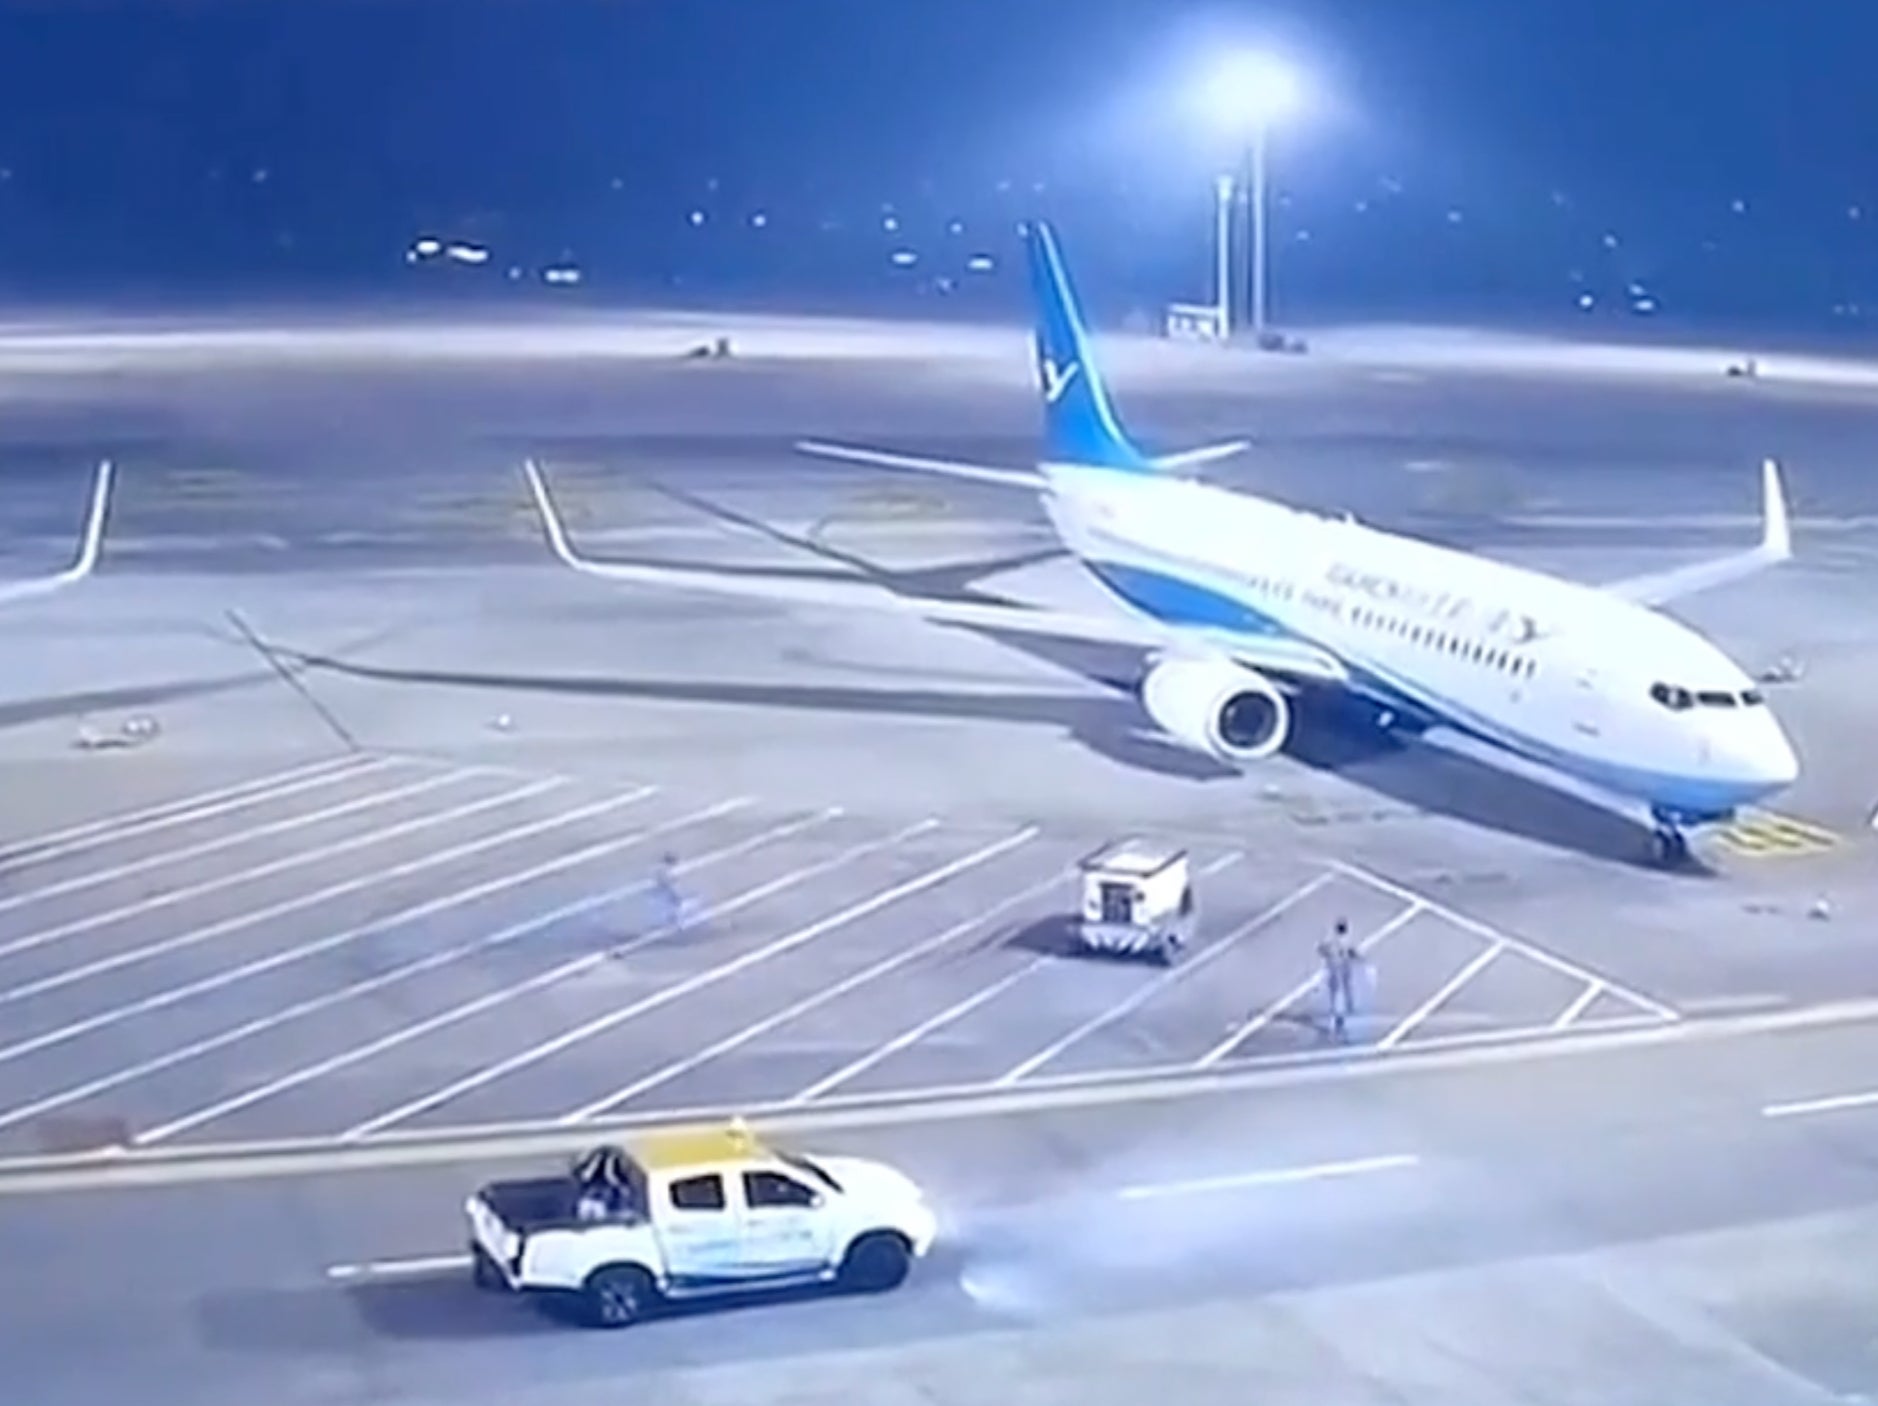 The Xiamen Airlines Boeing 737 sustained minor damage to an engine